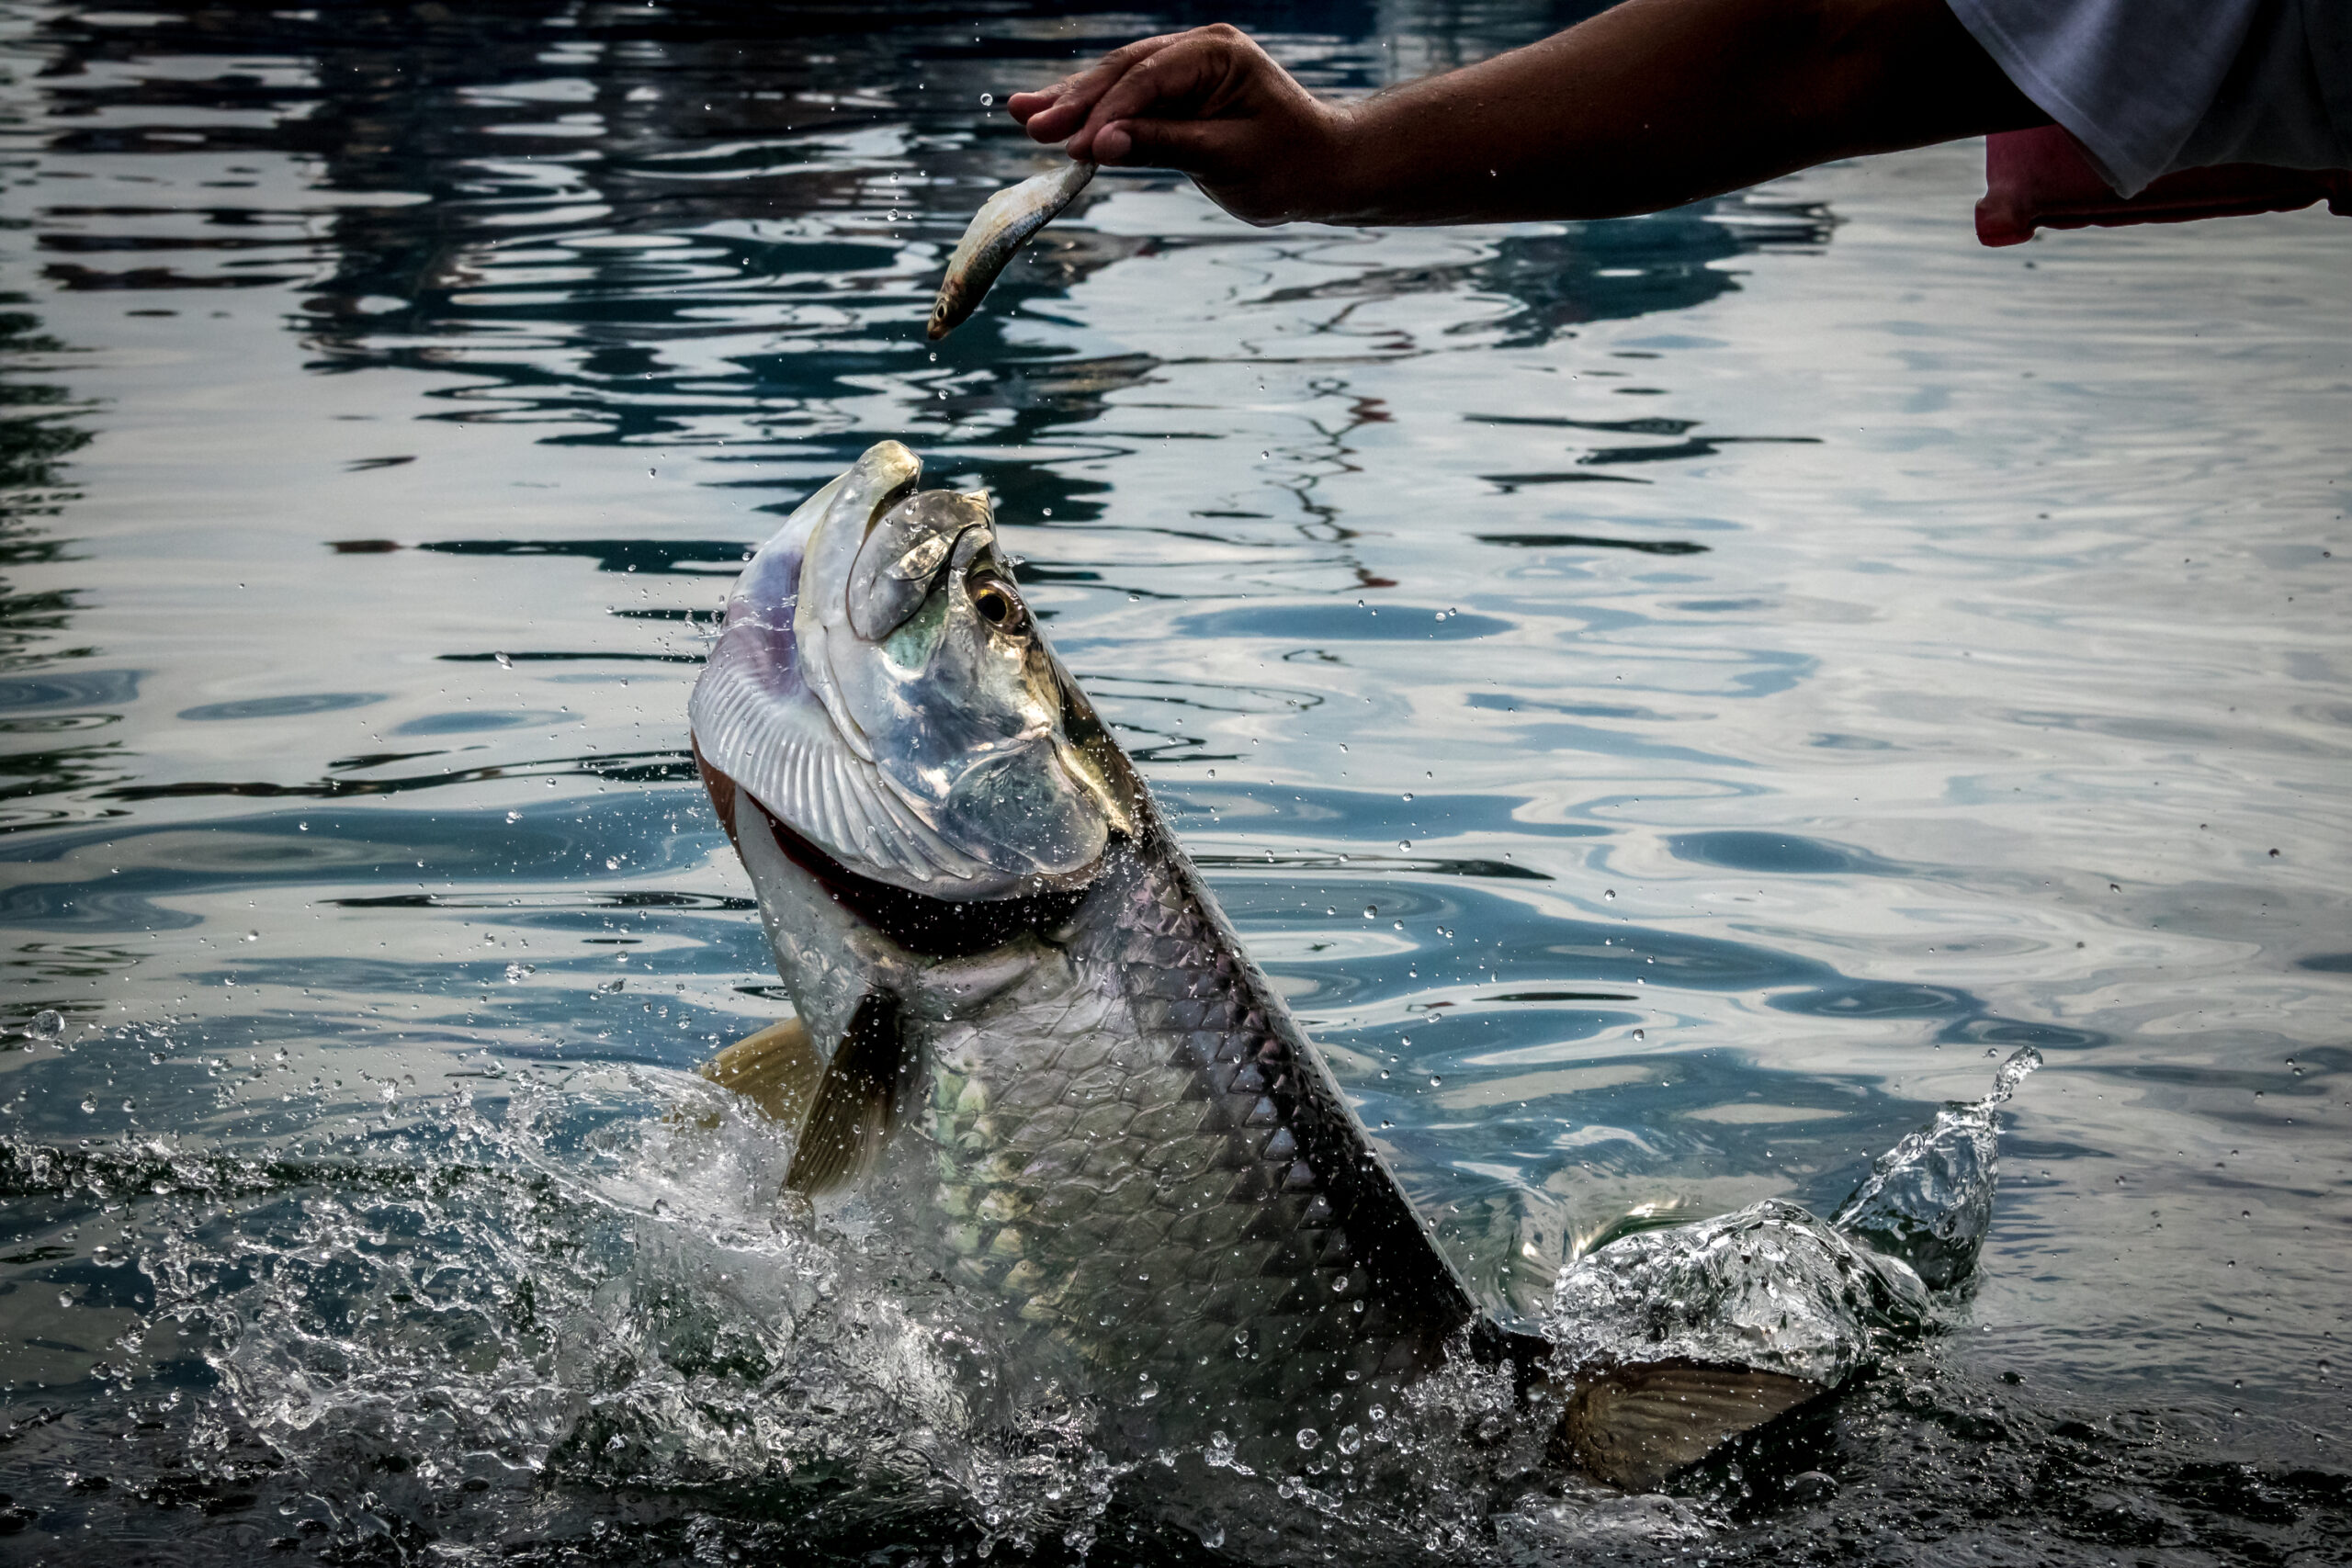 A close-up image of a fierce tarpon, one of the prized species sought after by inshore anglers in Puerto Rico, displaying its strength and beauty